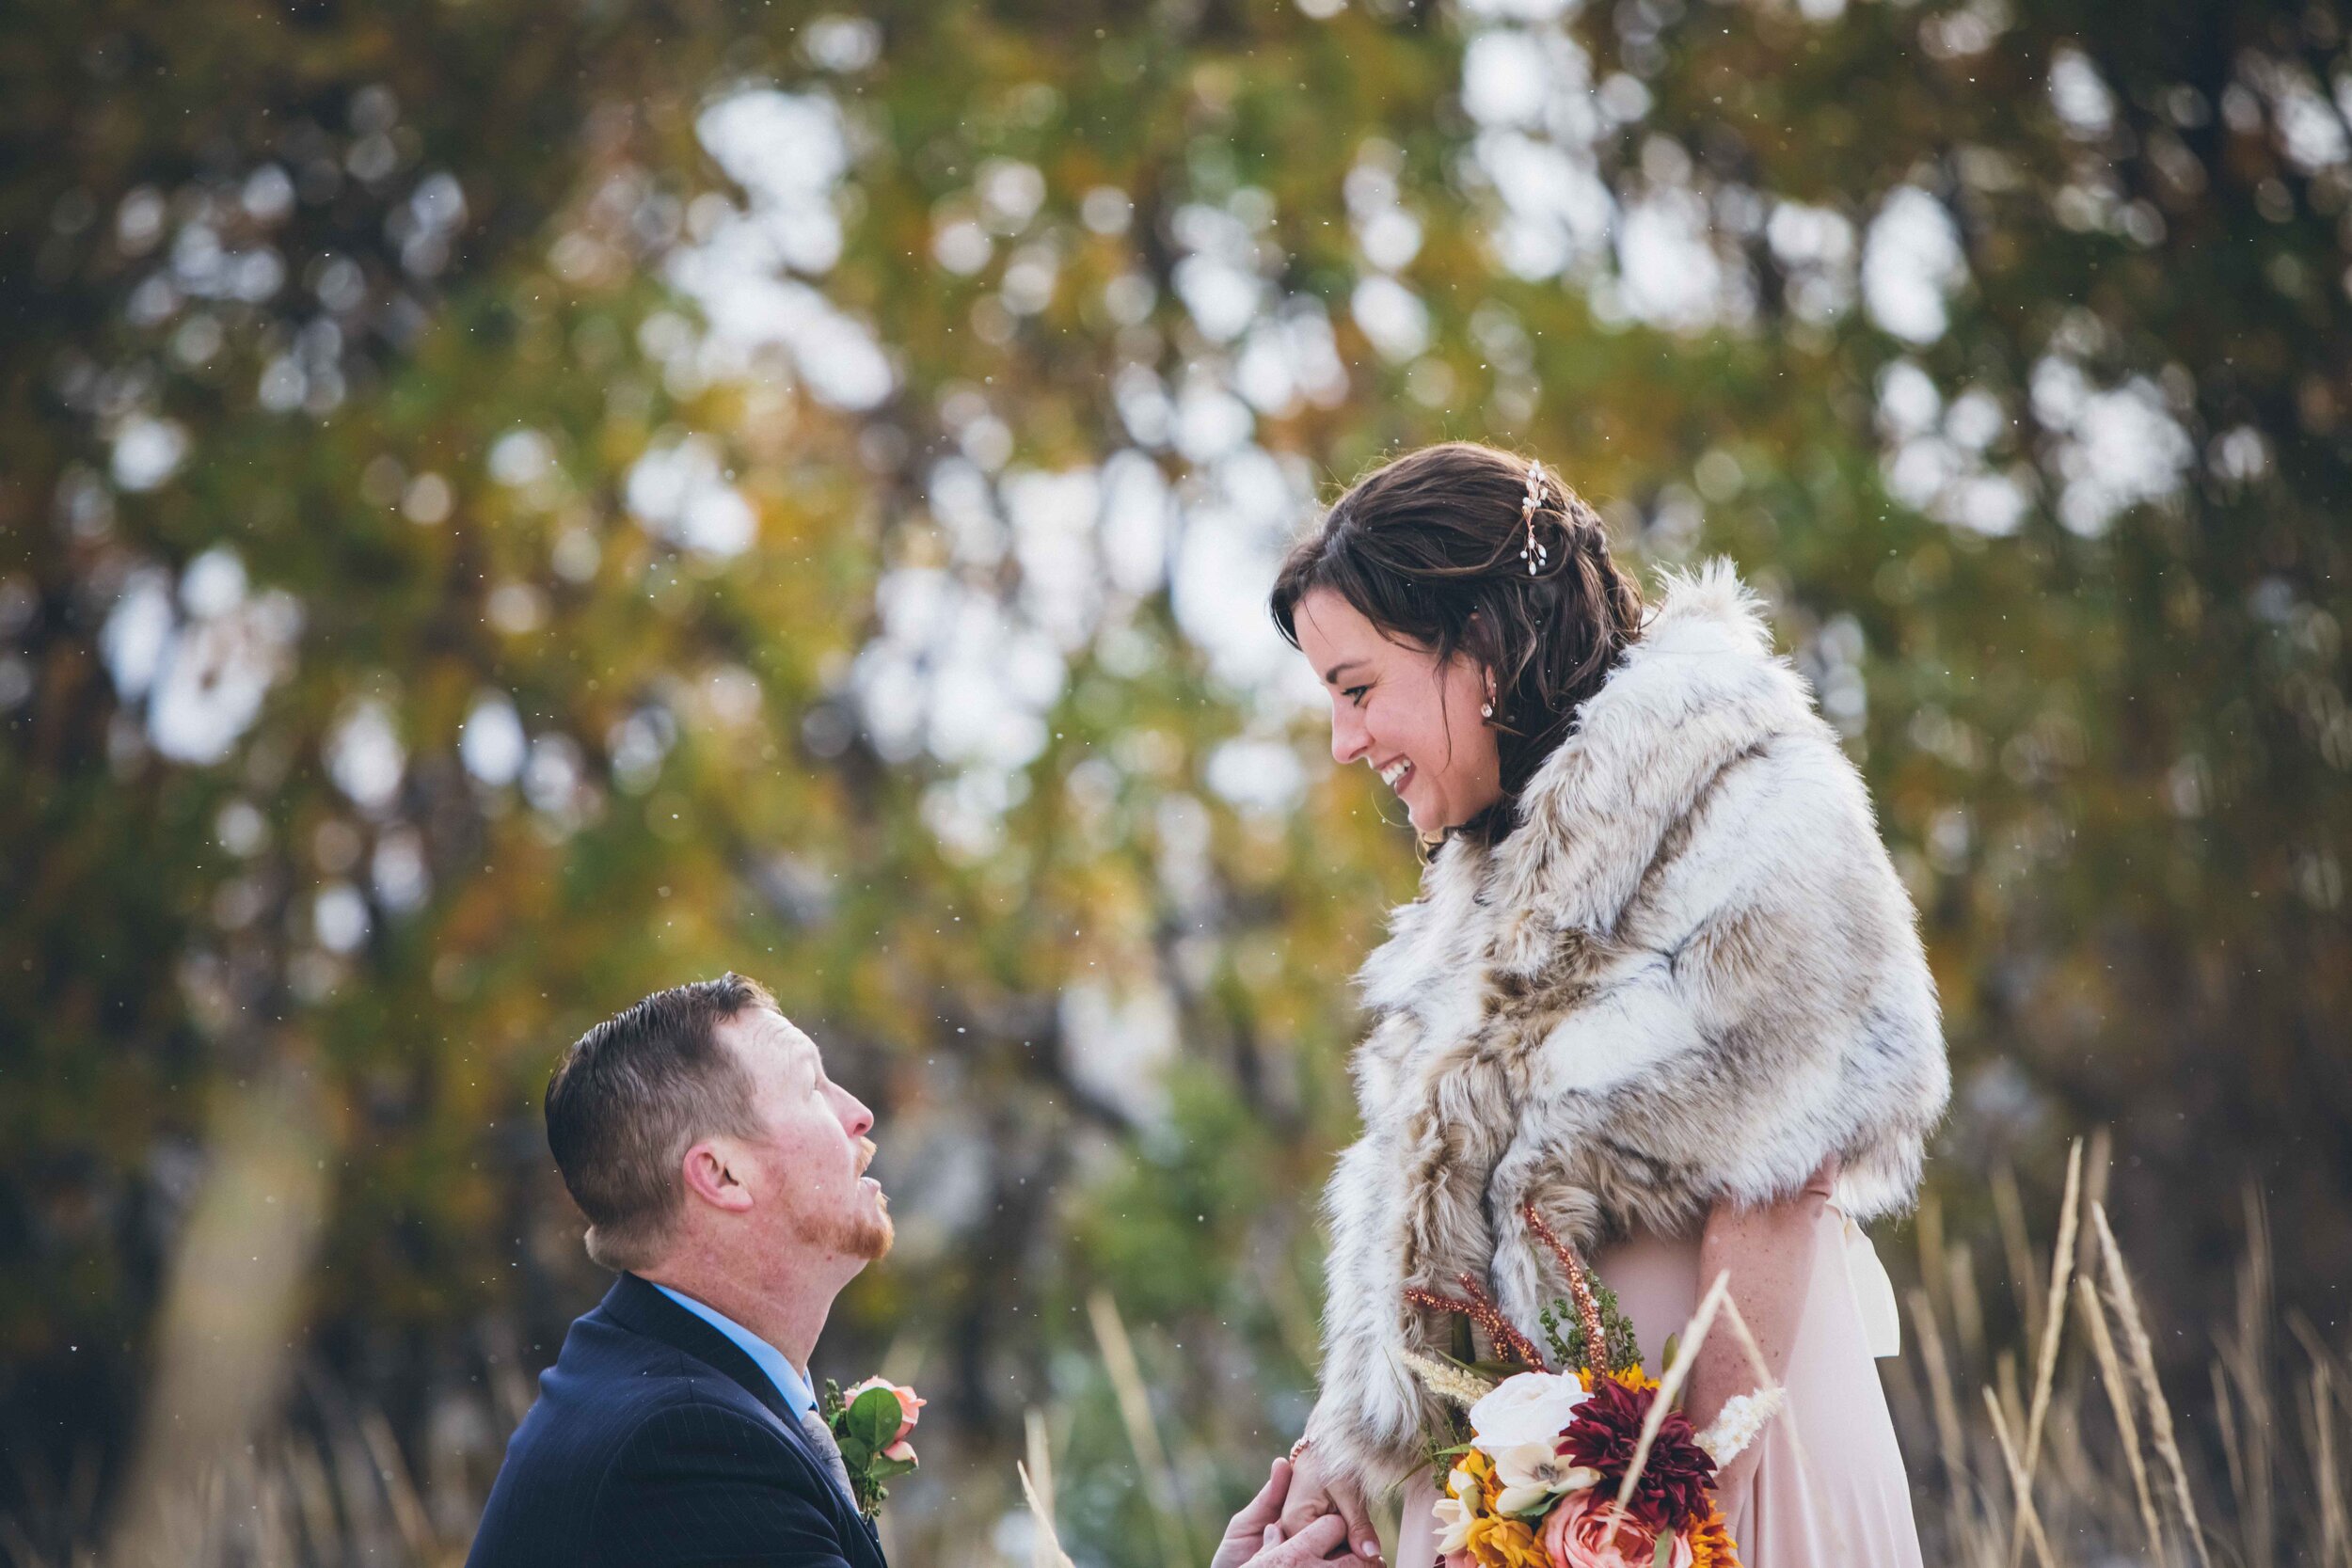 Garden of the Gods Elopement Photography. Small Wedding in Colorado Springs. Pandemic Elopements. Elopement Photographer Near Me. Winter Garden of the Gods Wedding. 